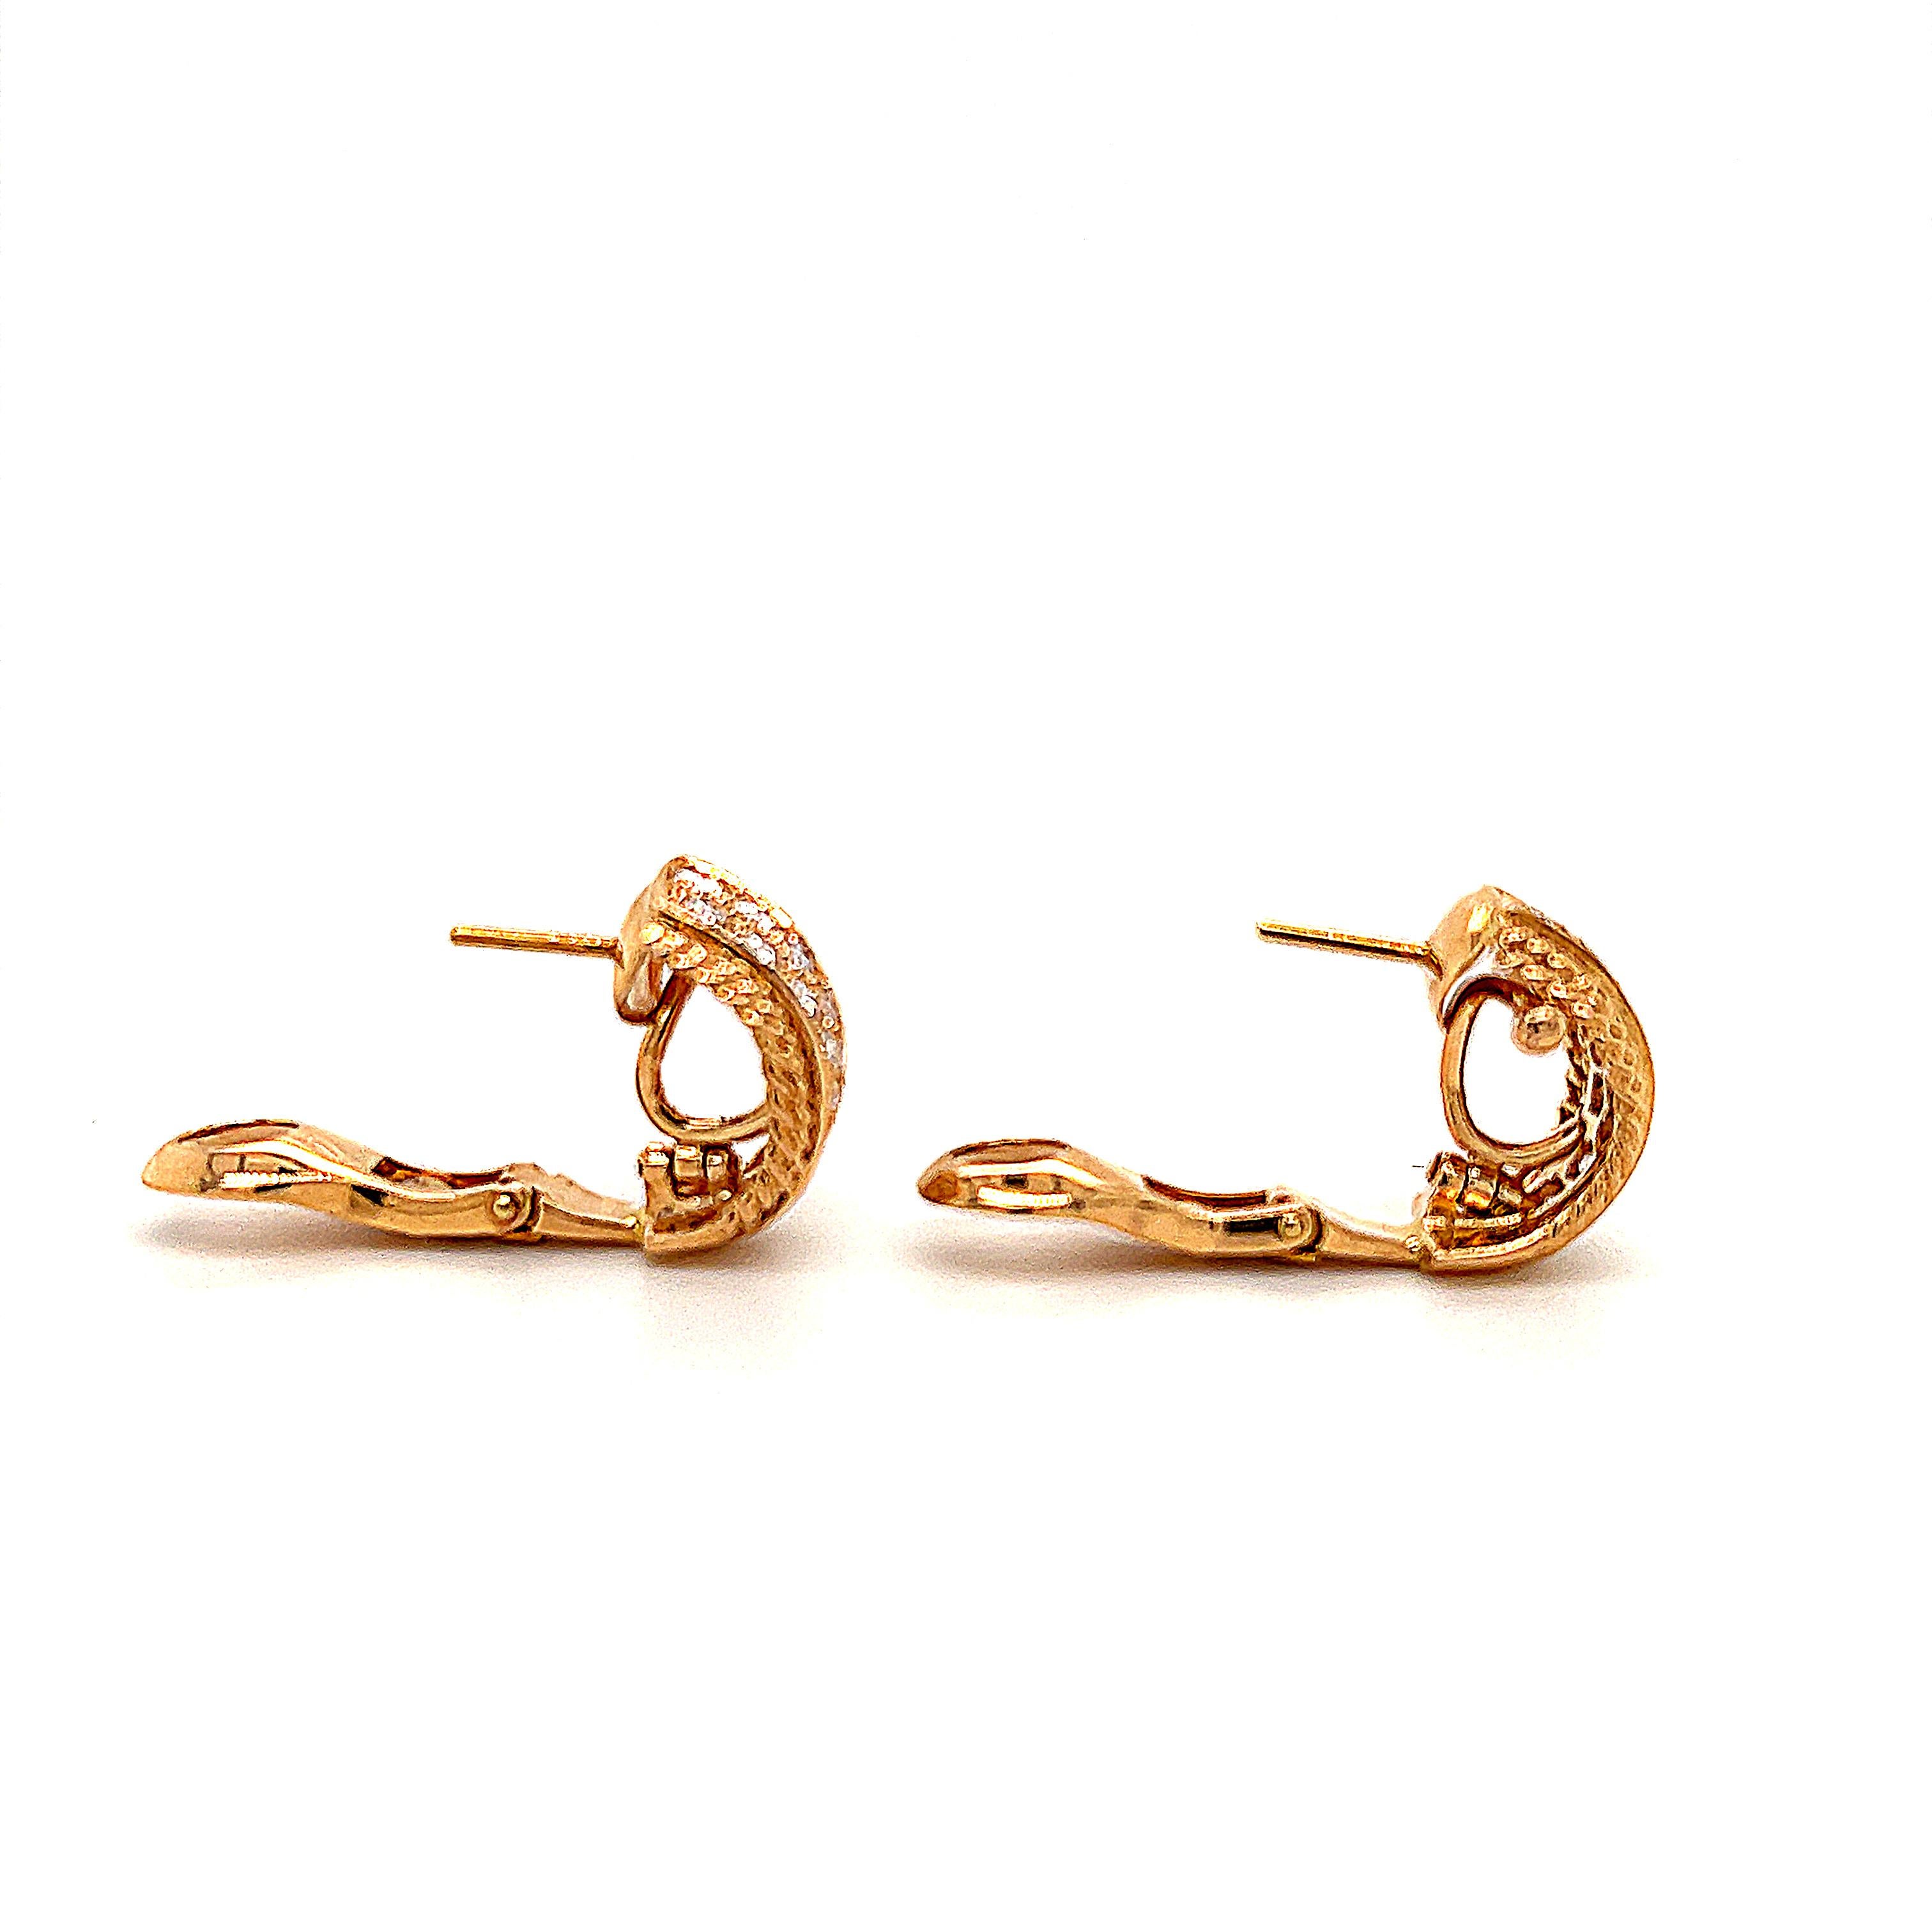 Elegant pair of earrings crafted in 18k yellow gold. This decadent pair of earrings is crafted by famed jewelry house Van Cleef & Arpels. Details are endless as the front half of the earrings are set with round brilliant cut diamonds that graduate